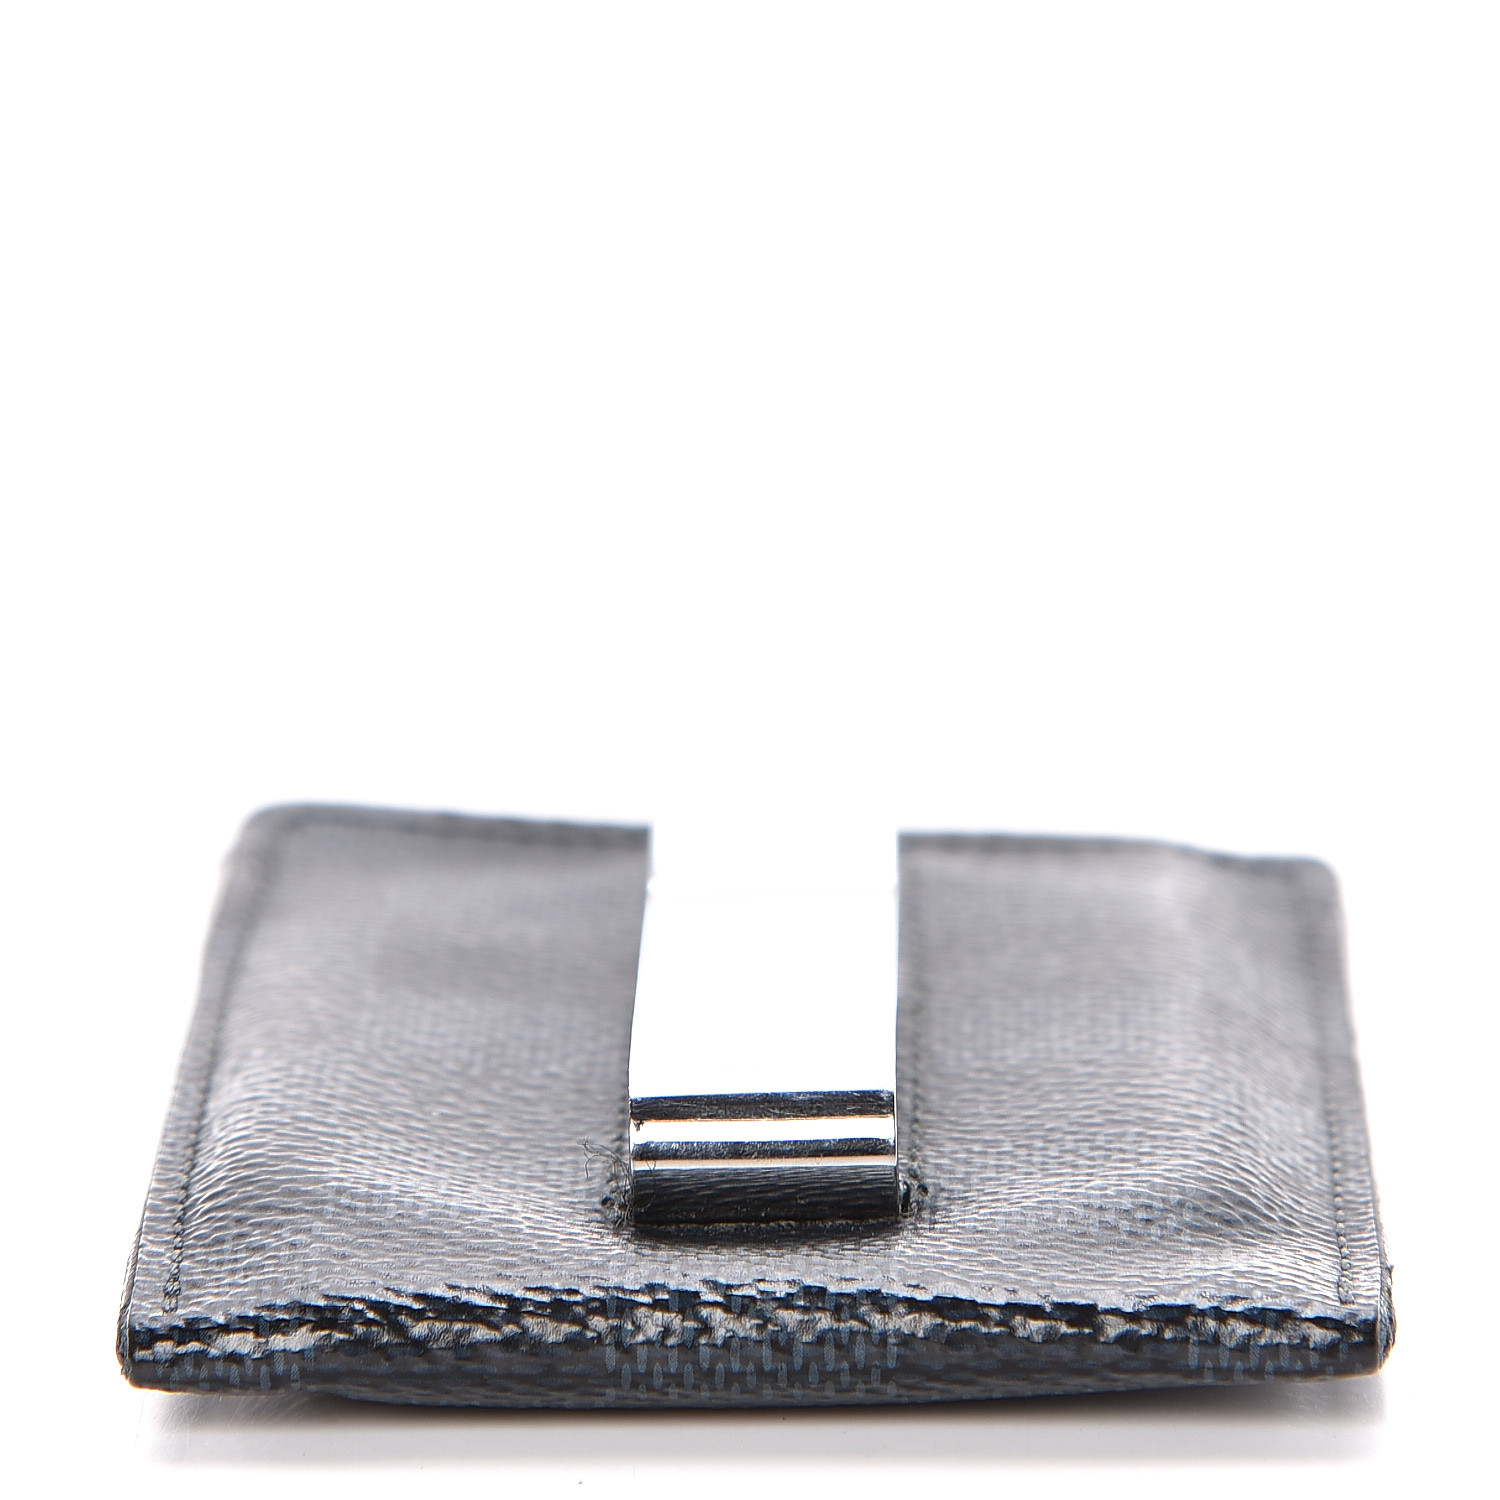 Louis Vuitton Prince Card Holder With Bill Clip Damier Graphite